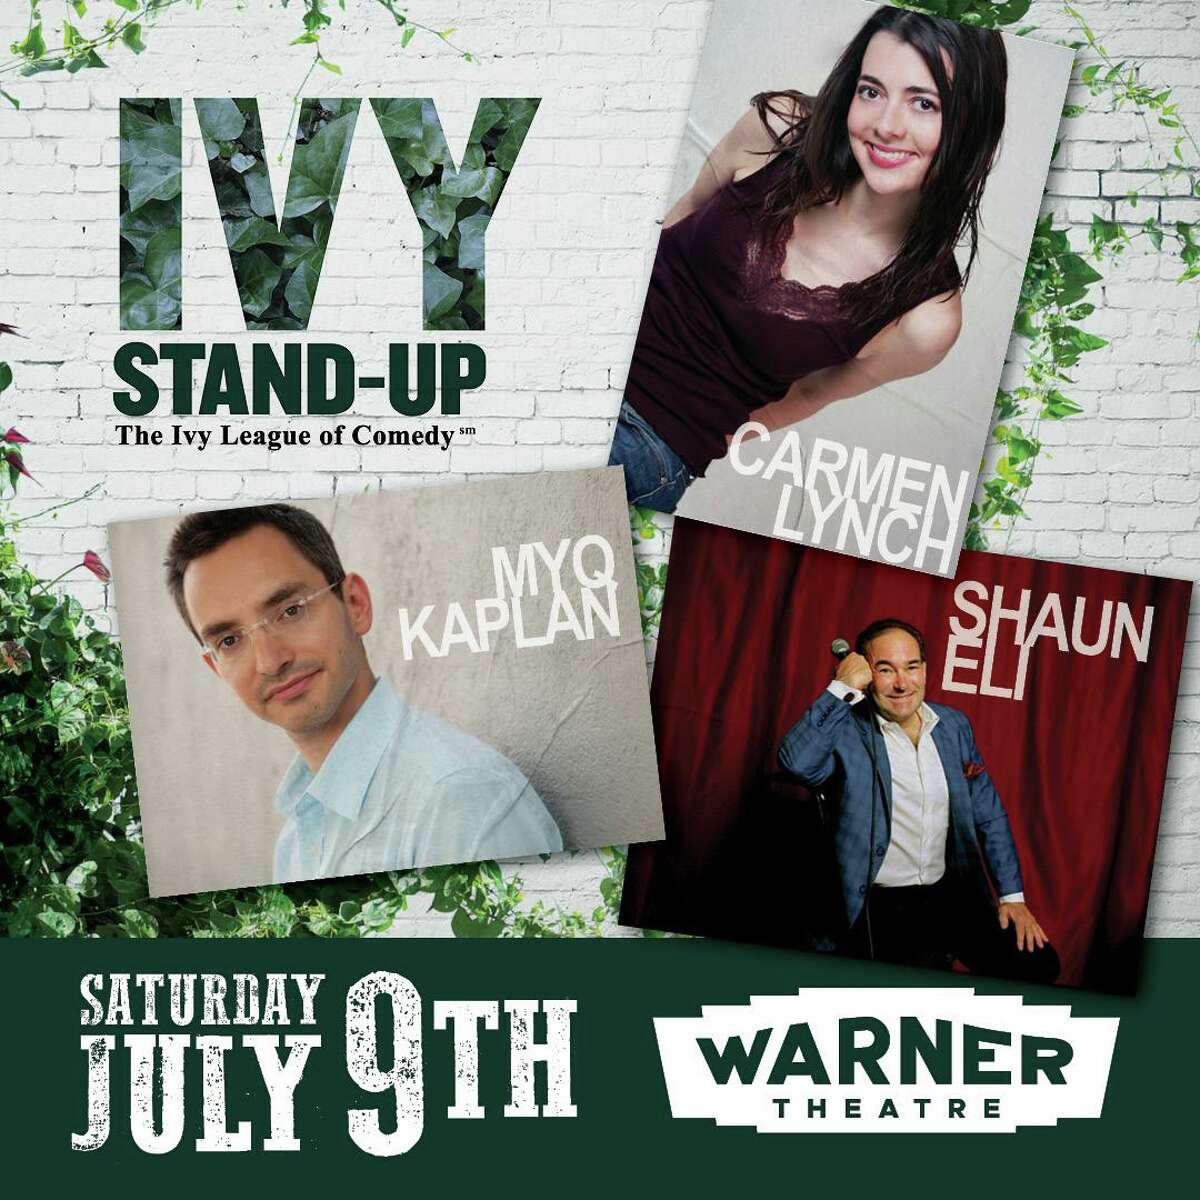 The Ivy League of Comedy is coming up at the Warner Theatre in Torrington. Other recently announced performances include Almost Queen Oct. 1, and country singer Trace Adkins Oct. 9.